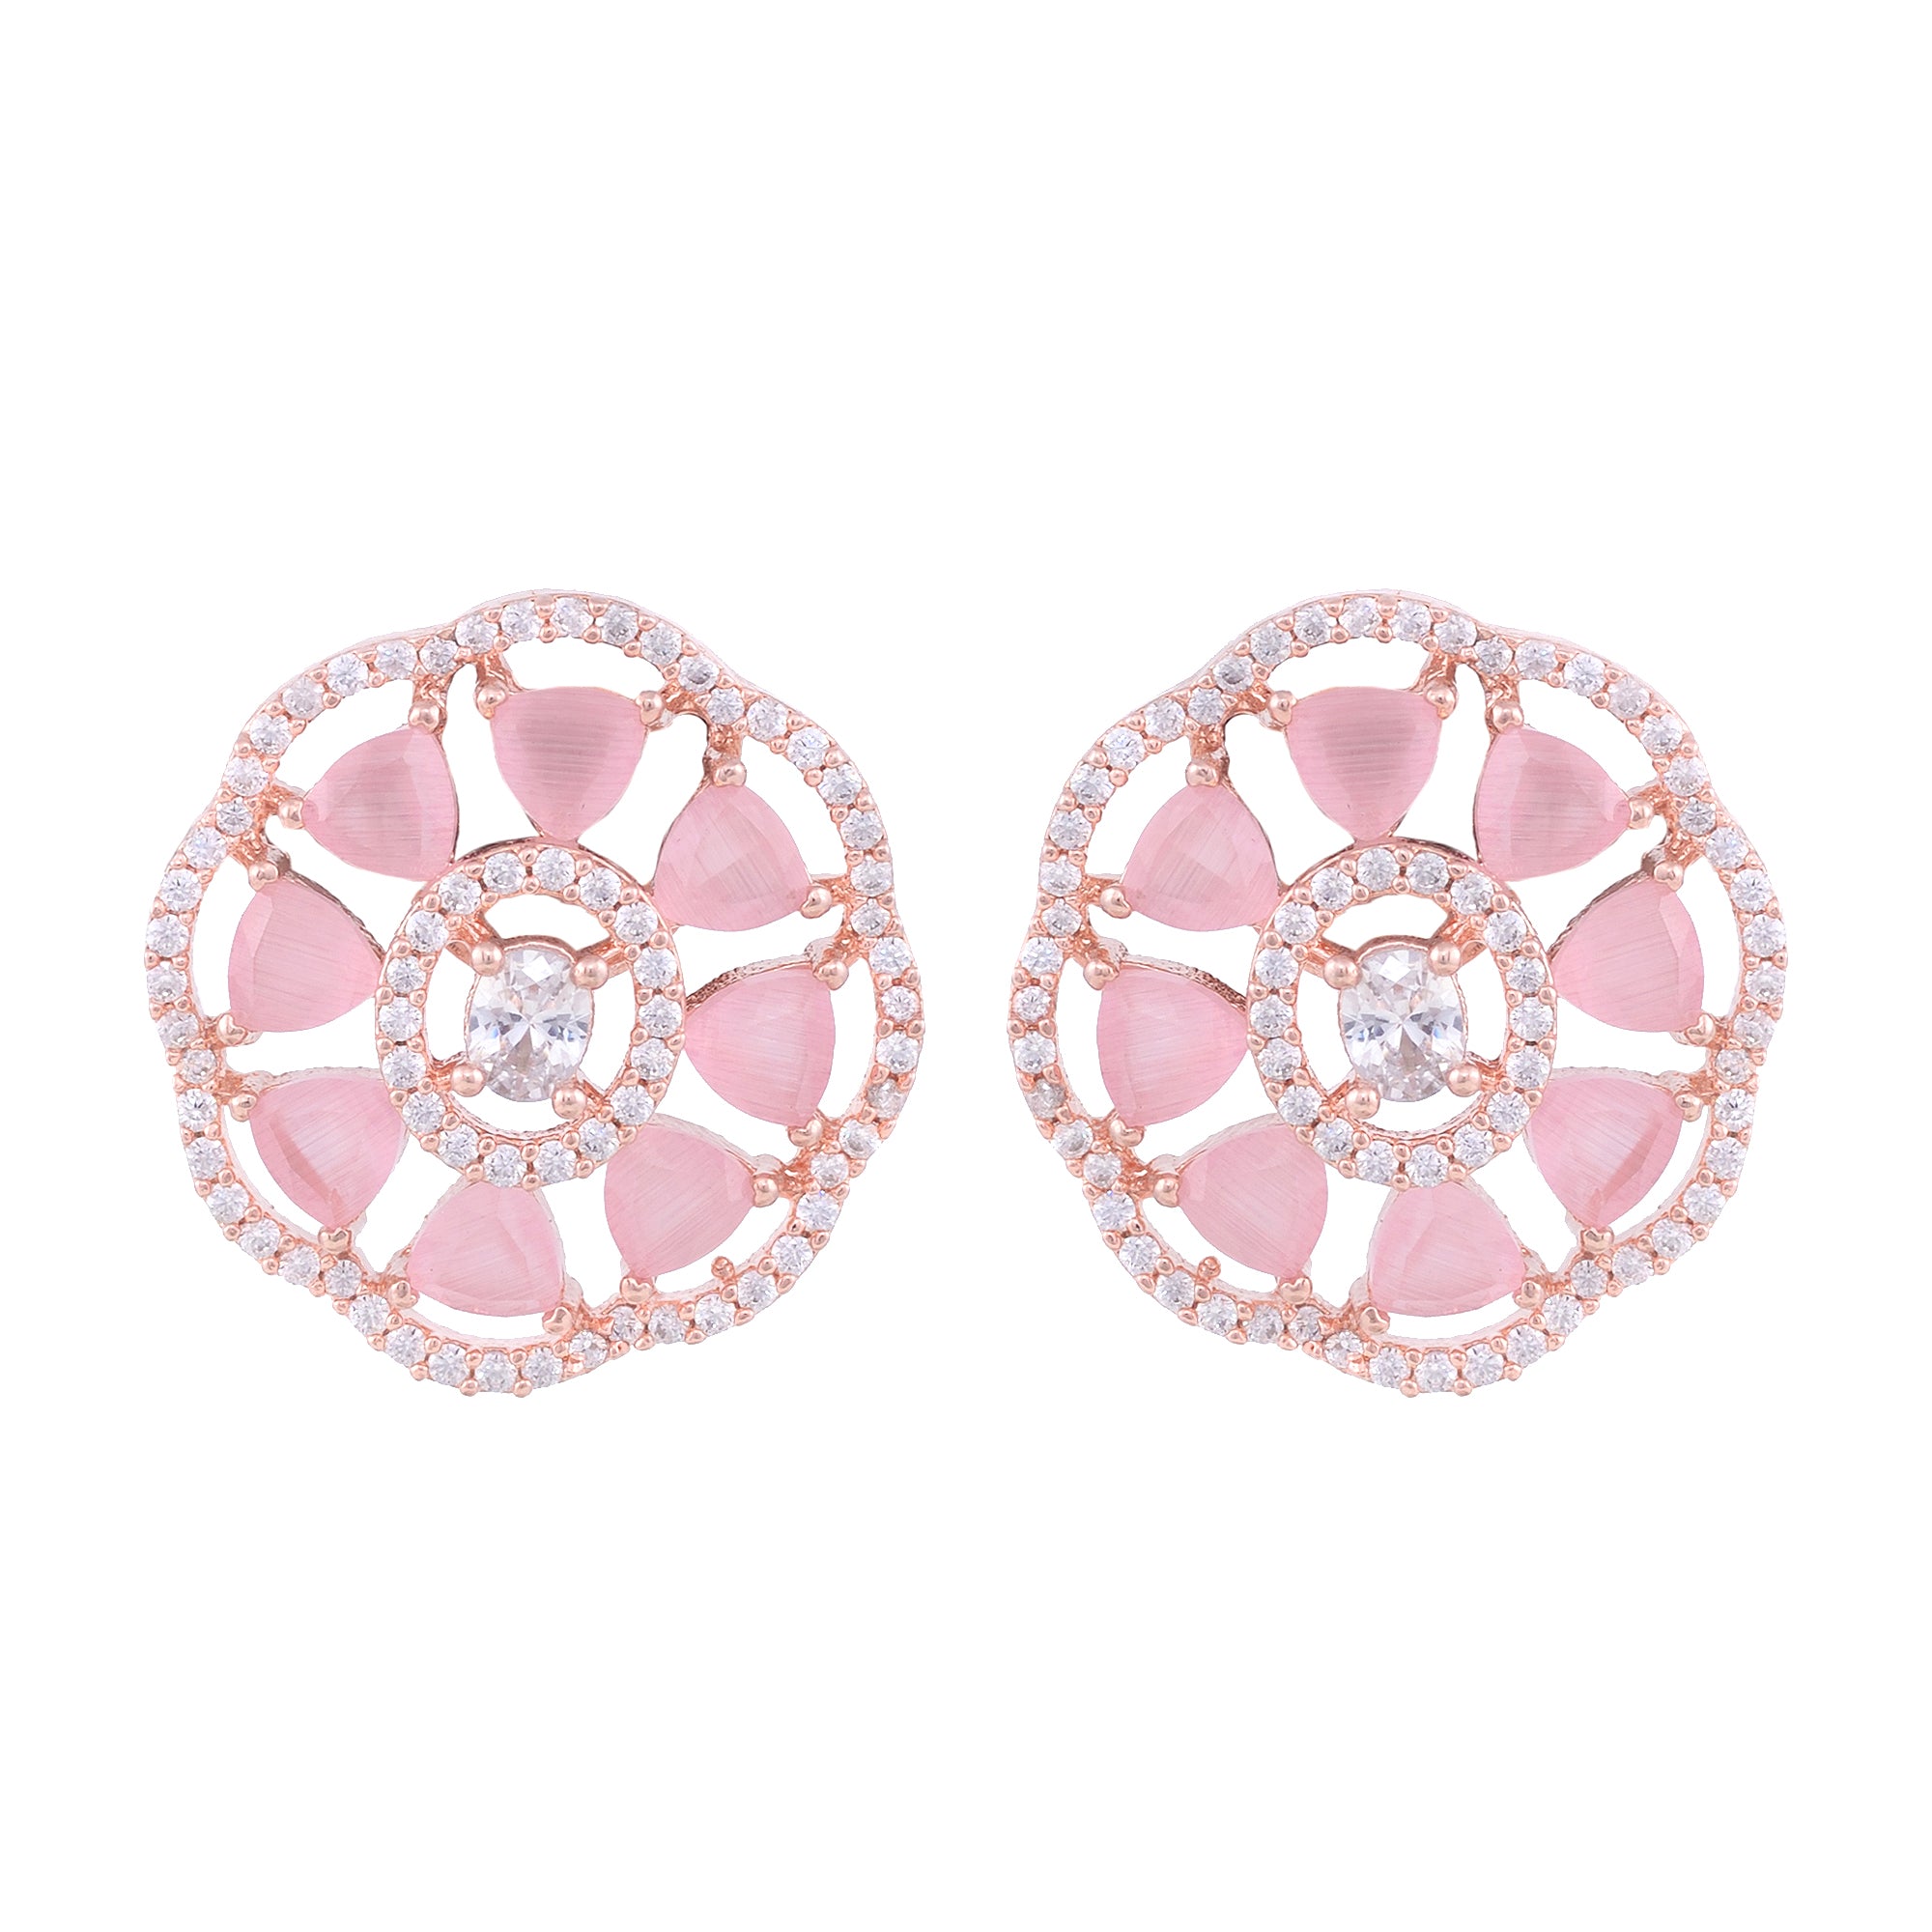 Handcrafted Floral Design Pastel Pink Studs Rose Quartz Small Earrings Rose Gold Plated for Women and Girls - Saraf RS Jewellery